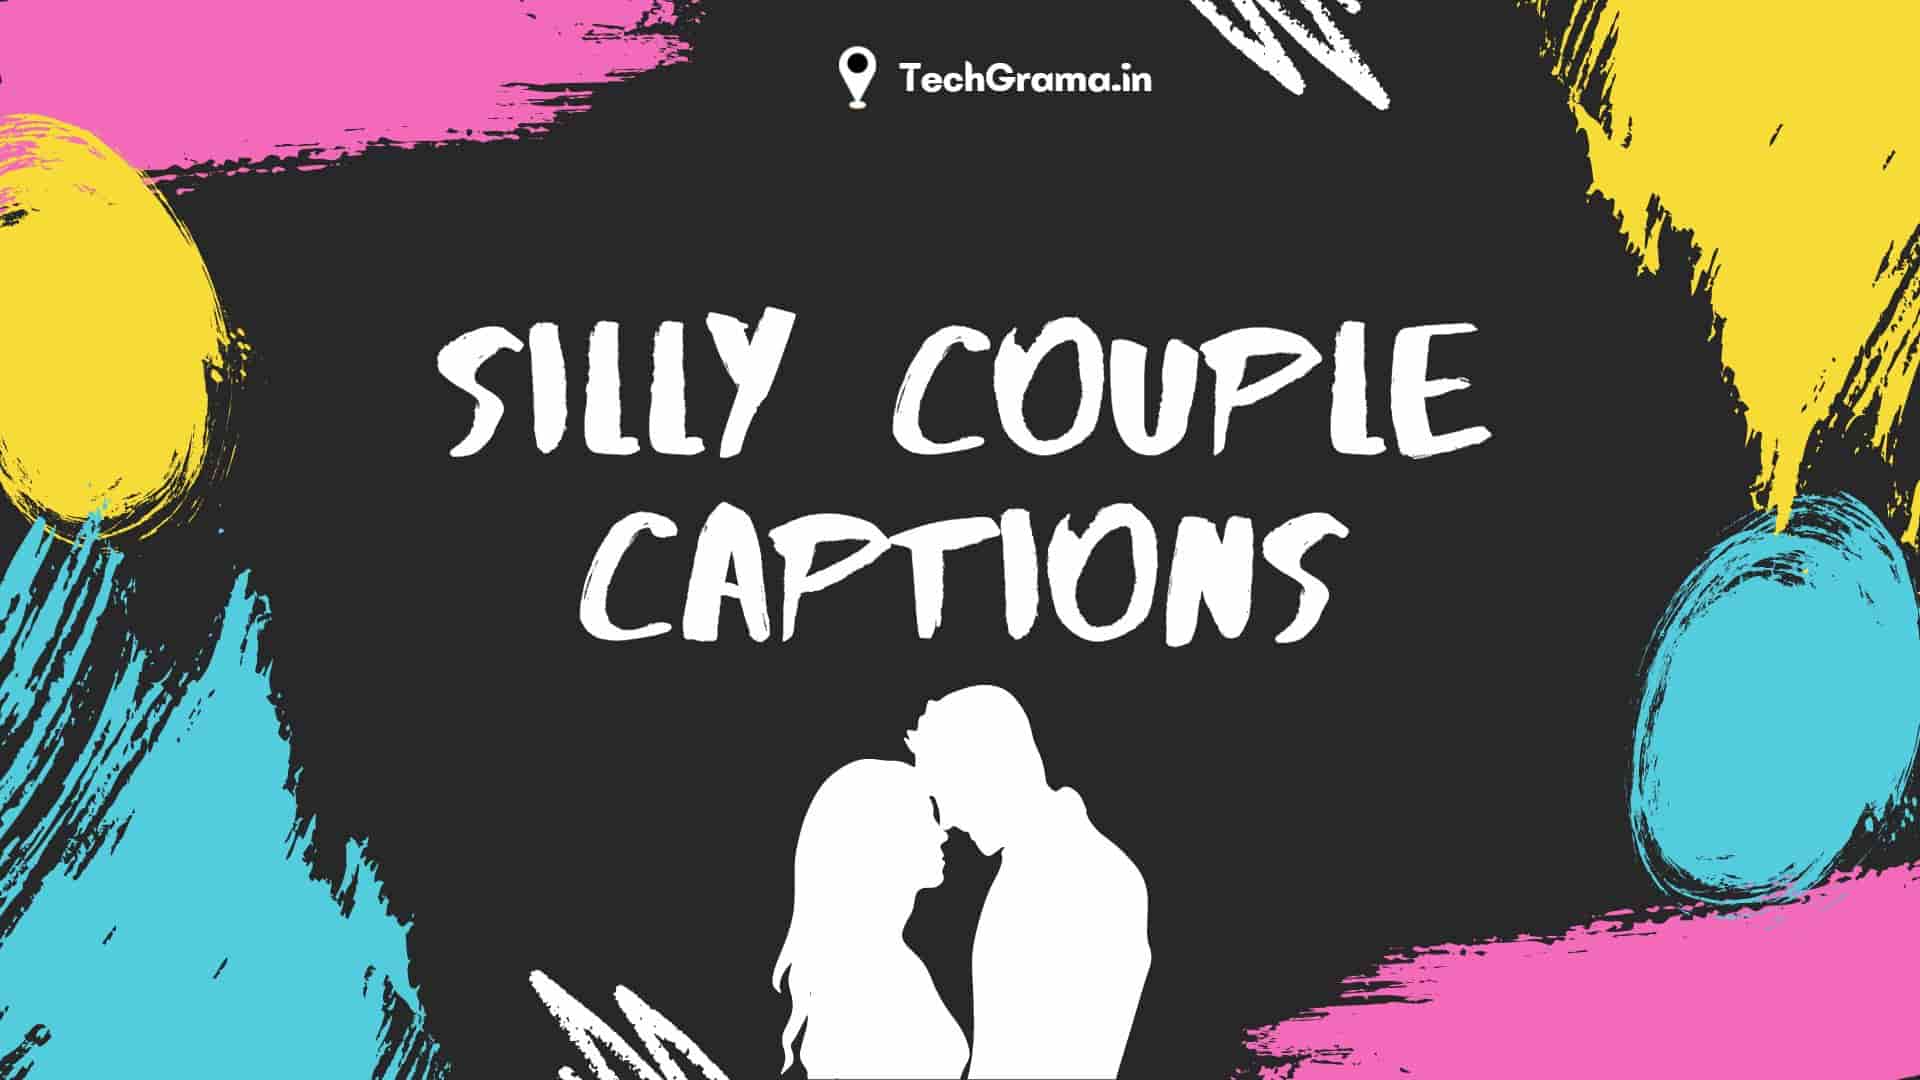 Best Funny Captions For Couples Pictures on Instagram, Funny Couple Captions, Funny Couple Quotes For Instagram, Silly Couple Captions, Funny Relationship Captions, Funny Couple Captions For Instagram, Funny Captions For Couples Posts, Funny Couple Captions For Guys, Funny Instagram Captions For Couples, Funny Couple Captions in English, Funny Couple Captions For Boyfriend or Girlfriend.